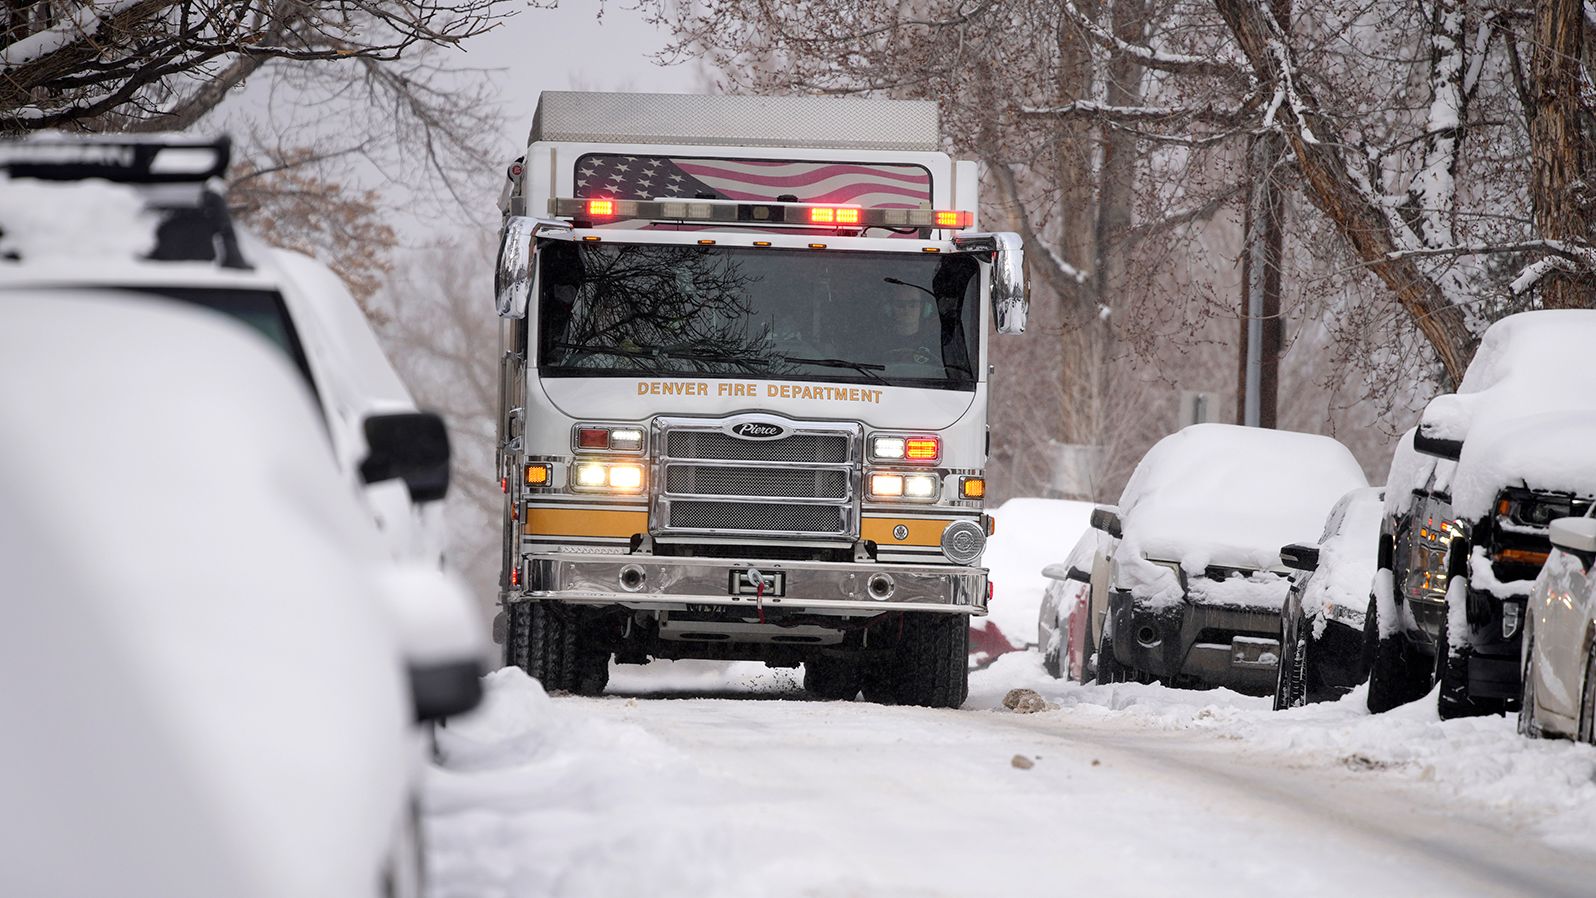 A Denver Fire Department truck heads to a call on Wednesday.